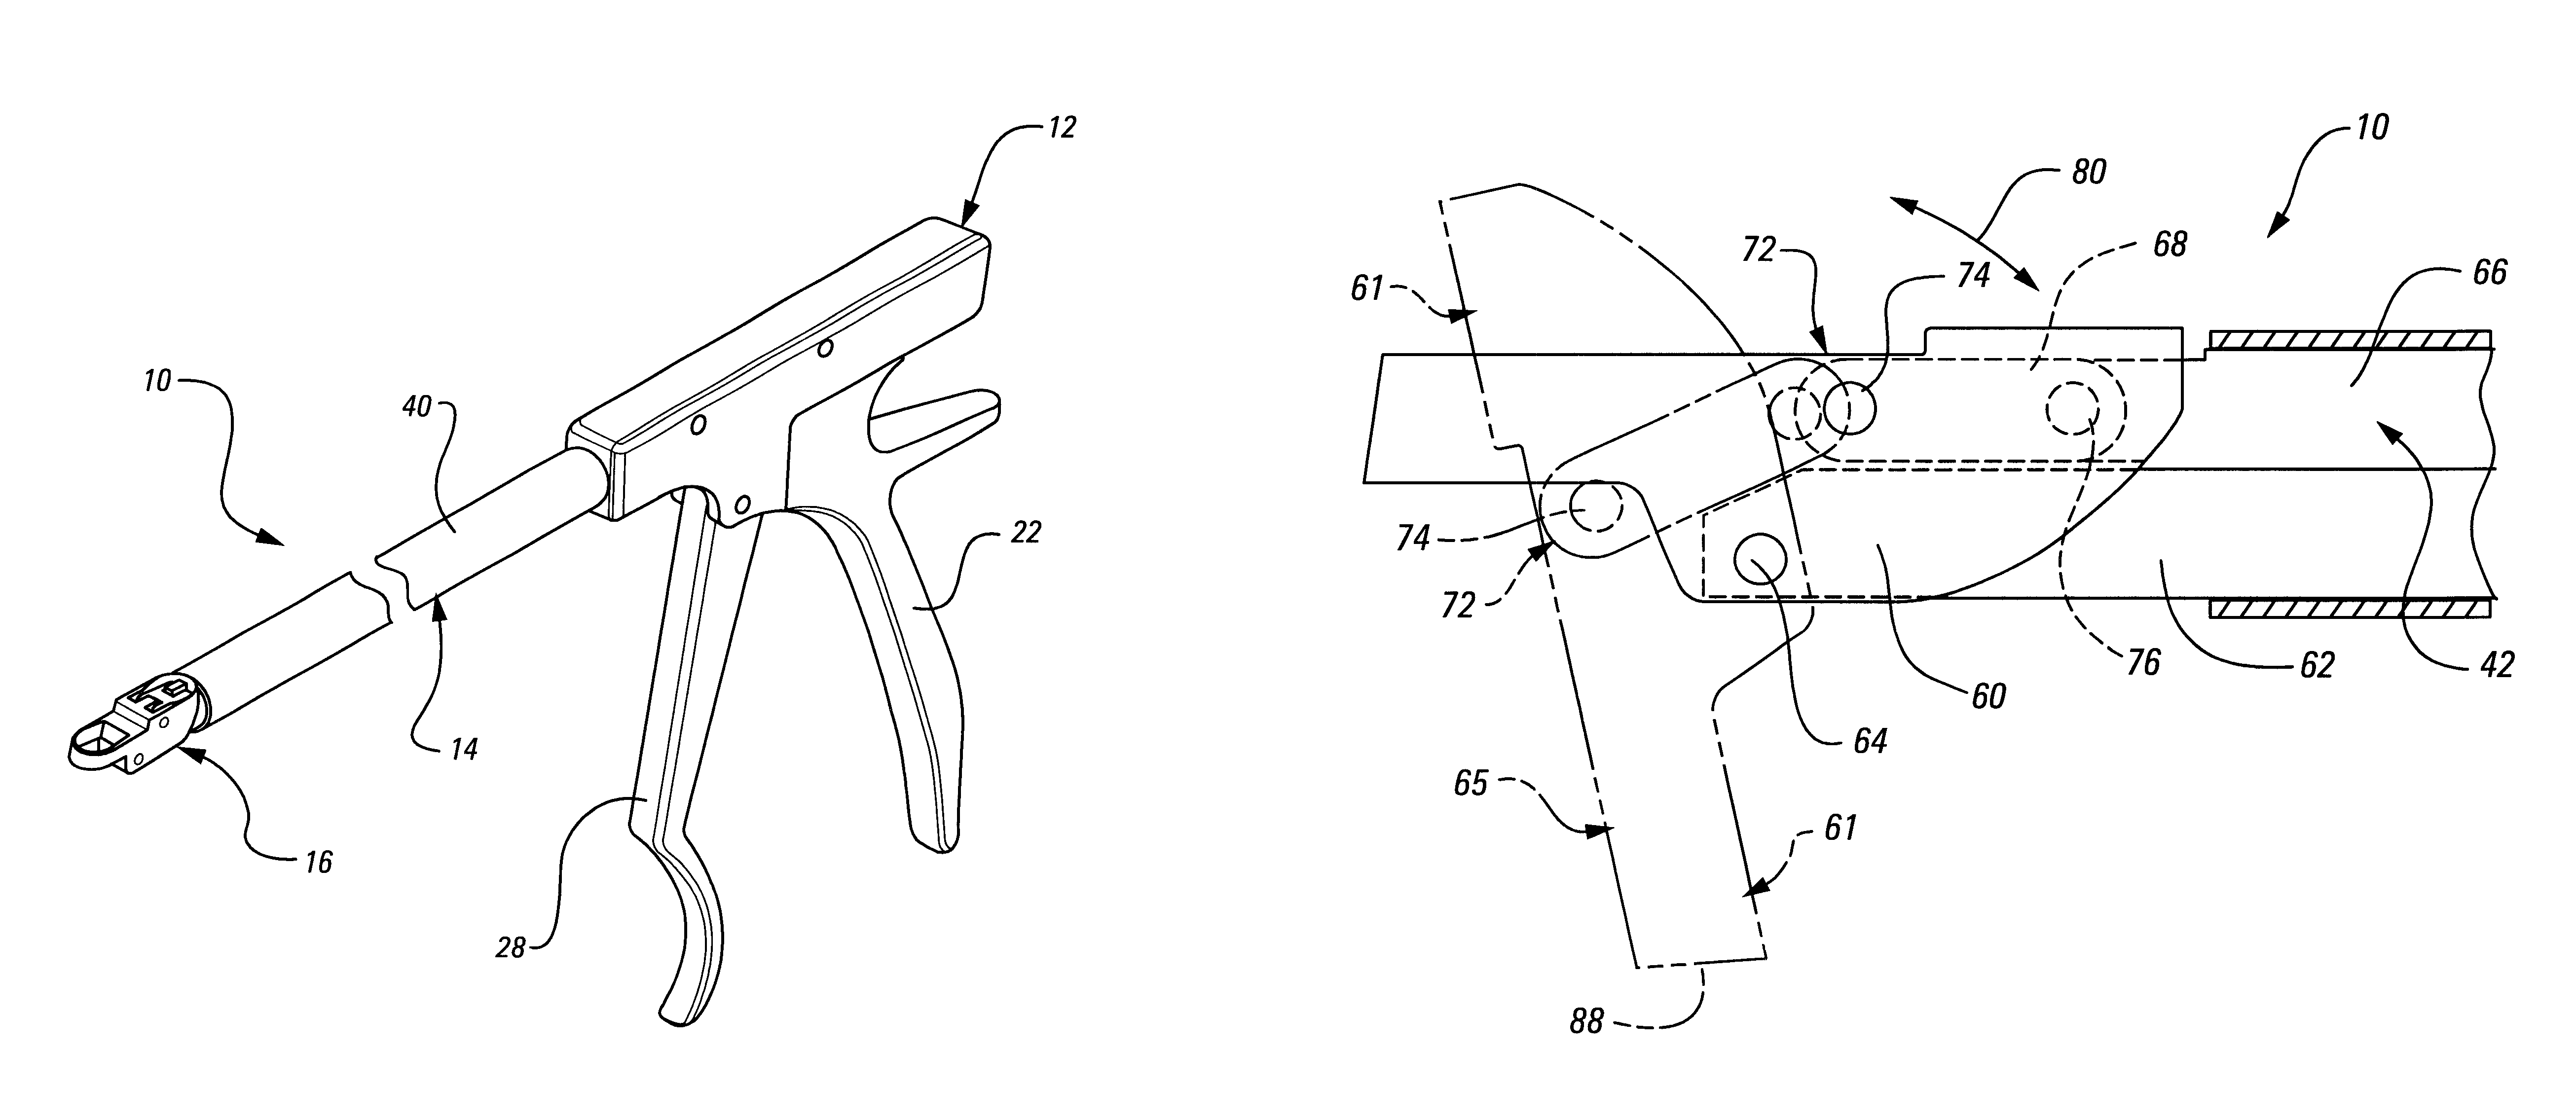 Circumferential resecting reamer tool